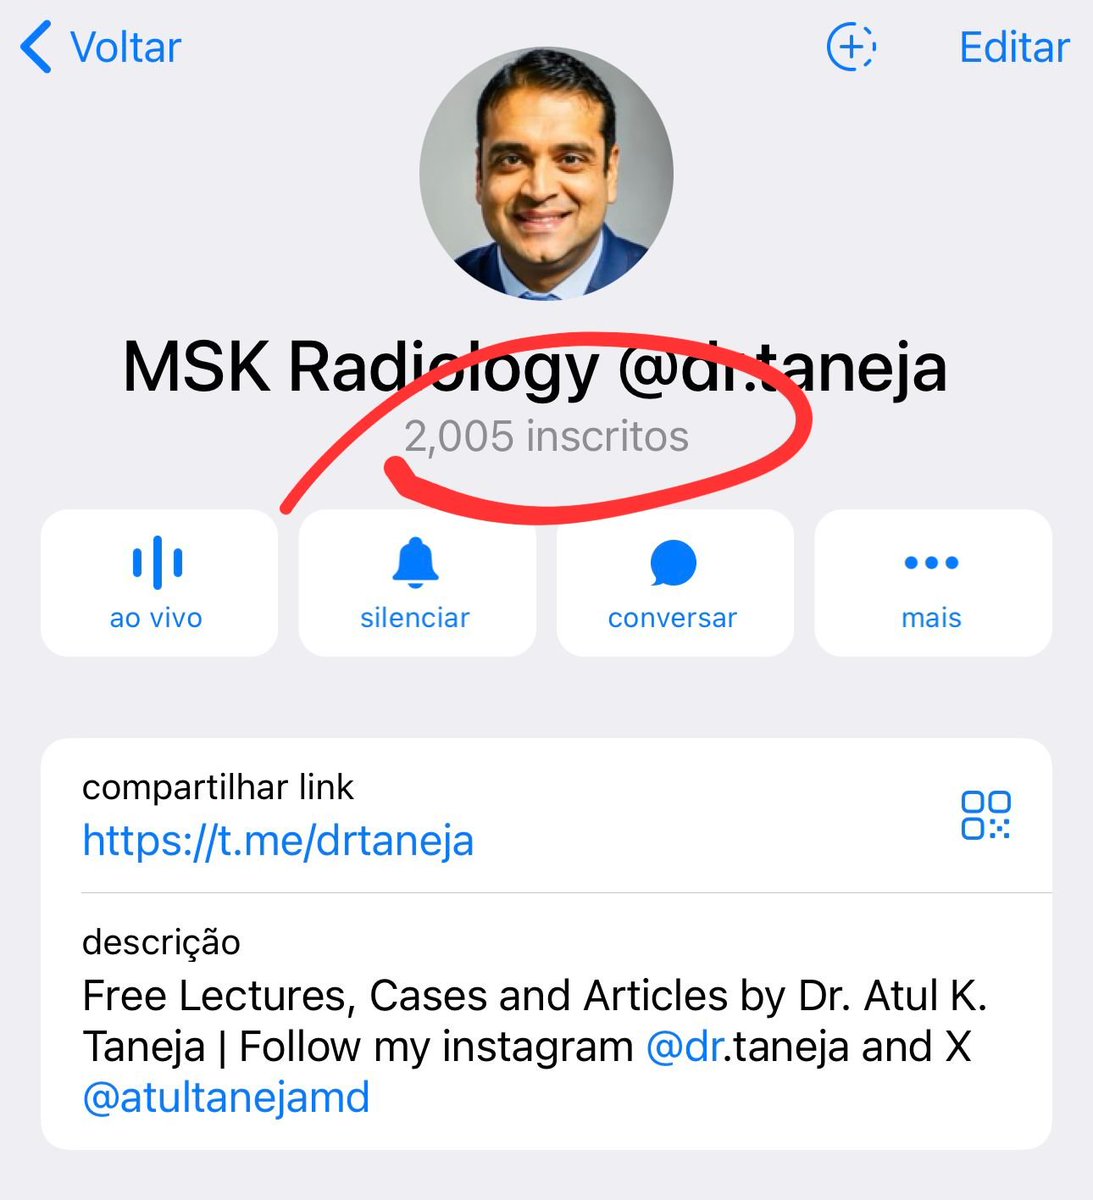 Happy to see that my Telegram channel on MSK Rad surpassed 2k subscribers! Started during COVID to share live classes and free lectures, now it became a source for daily updated on cases, articles and webinars for radiologists around the world! Join at t.me/drtaneja